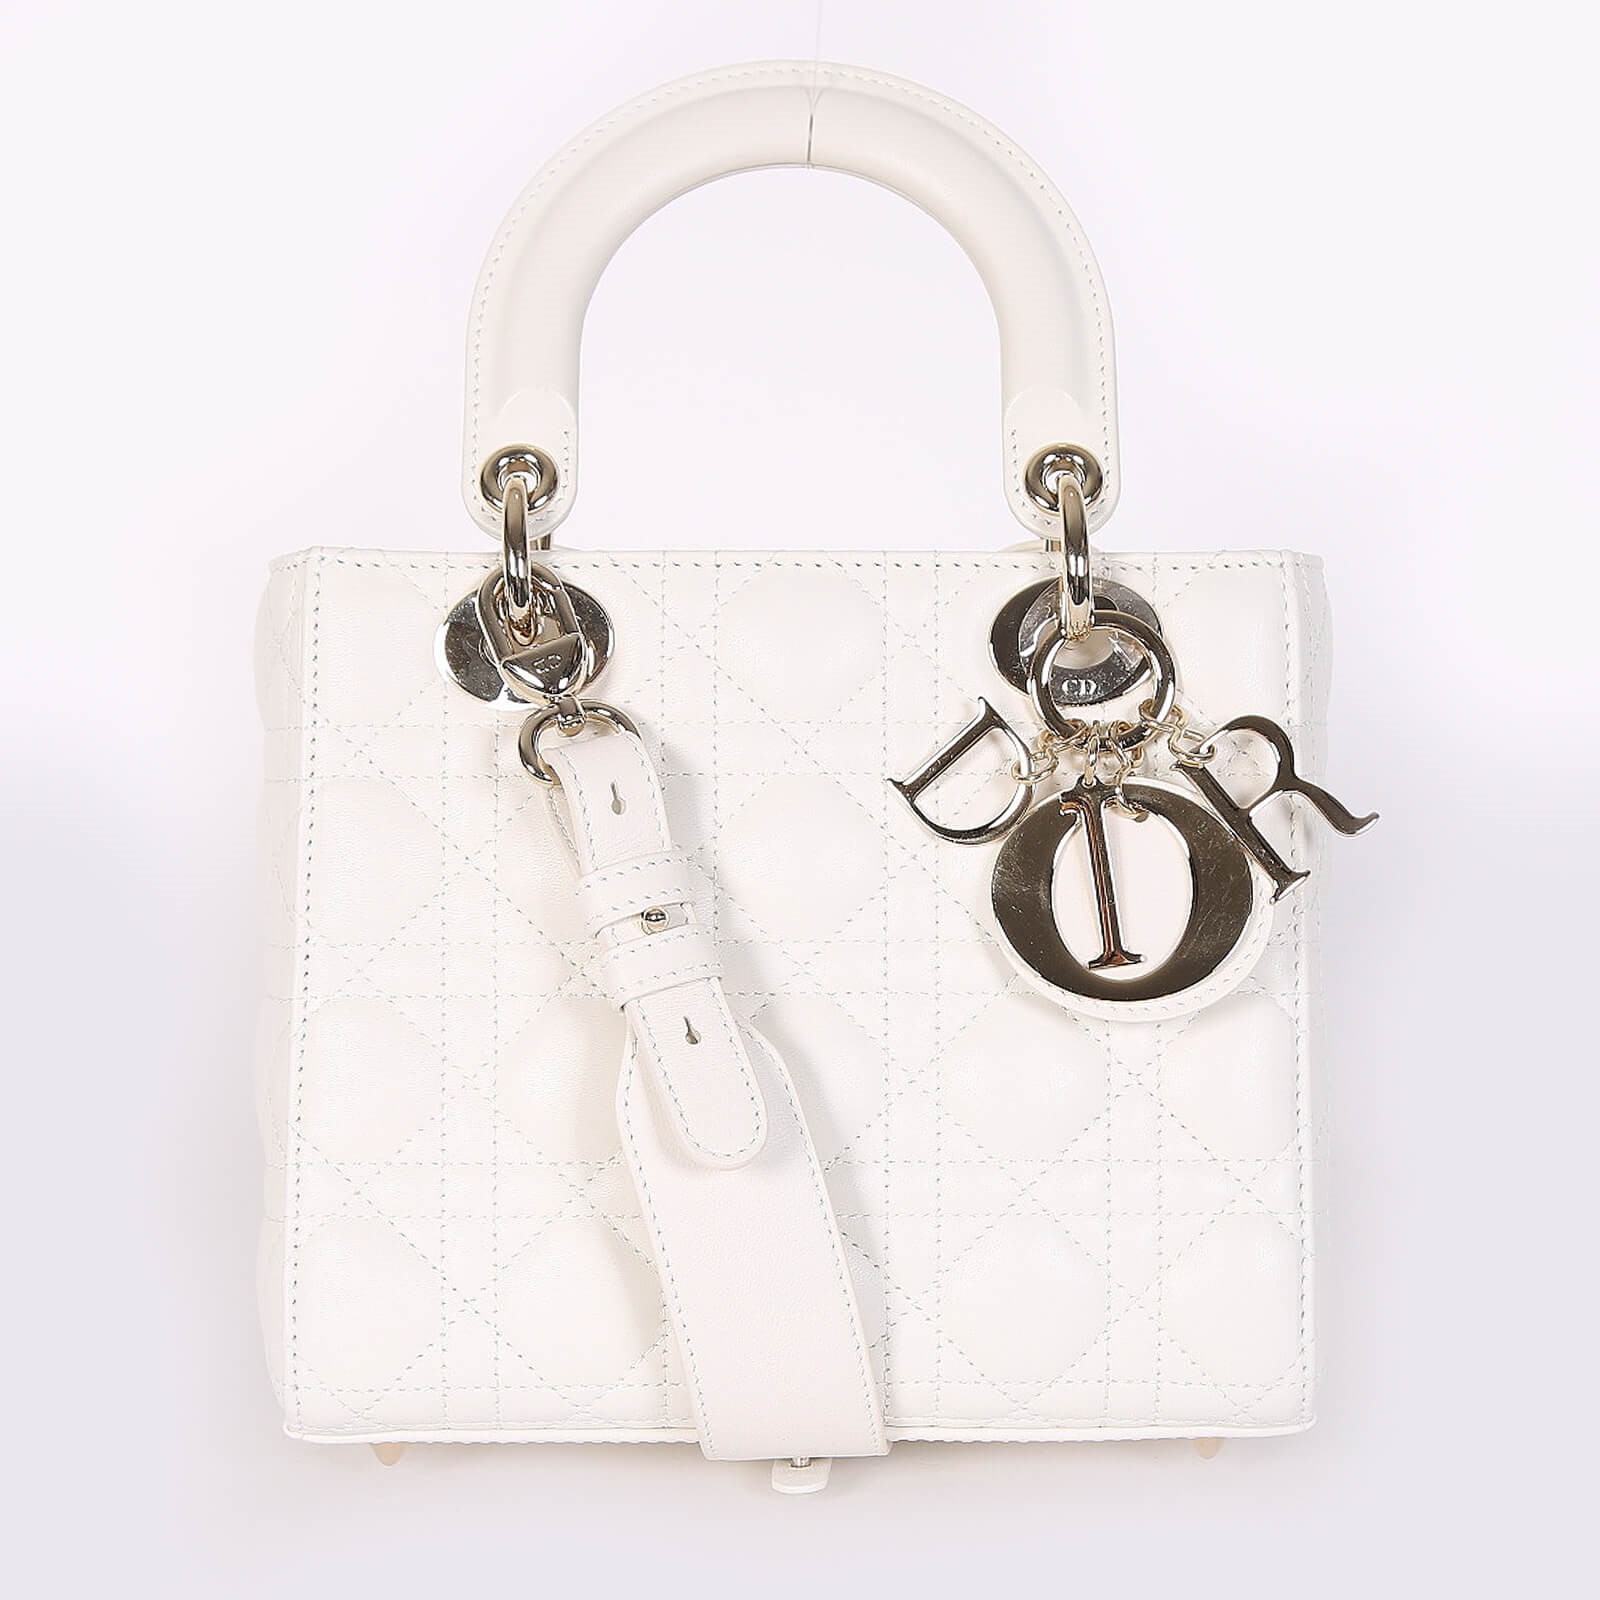 Lady Dior Bag NEW (small / my abcdior) white latte cannage lambskin